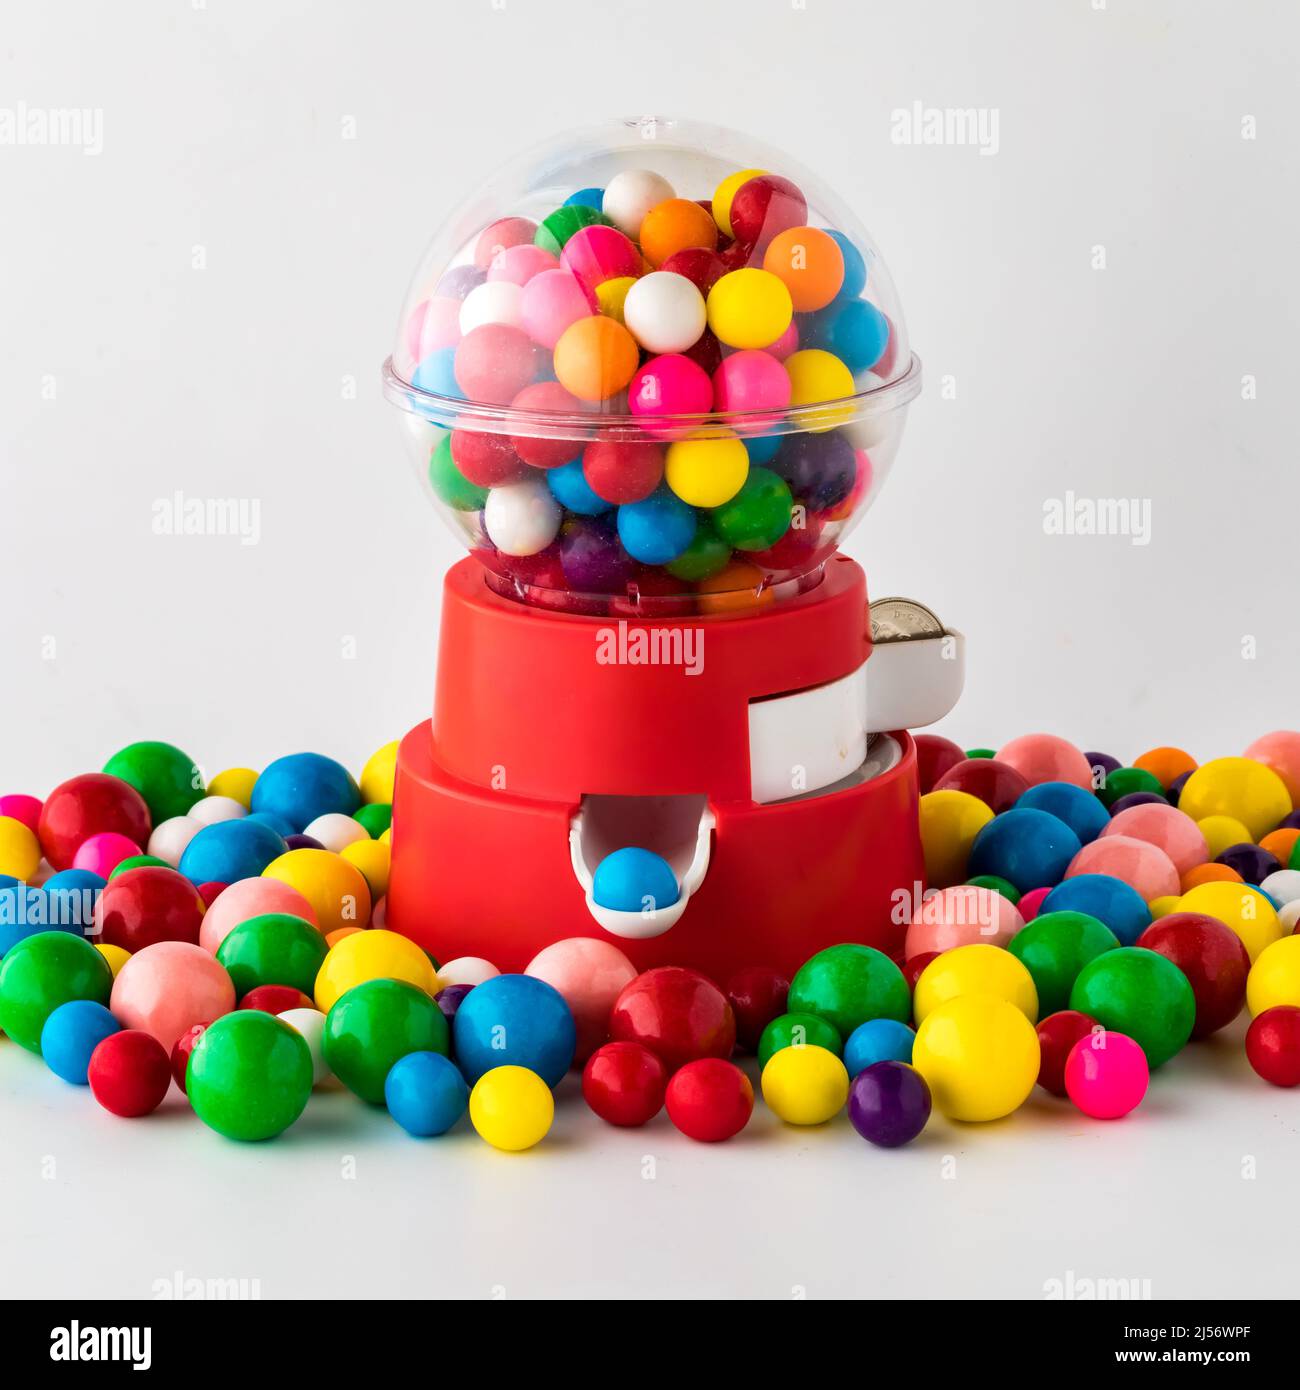 A toy gum ball machine filled with and surrounded by gum balls. Stock Photo